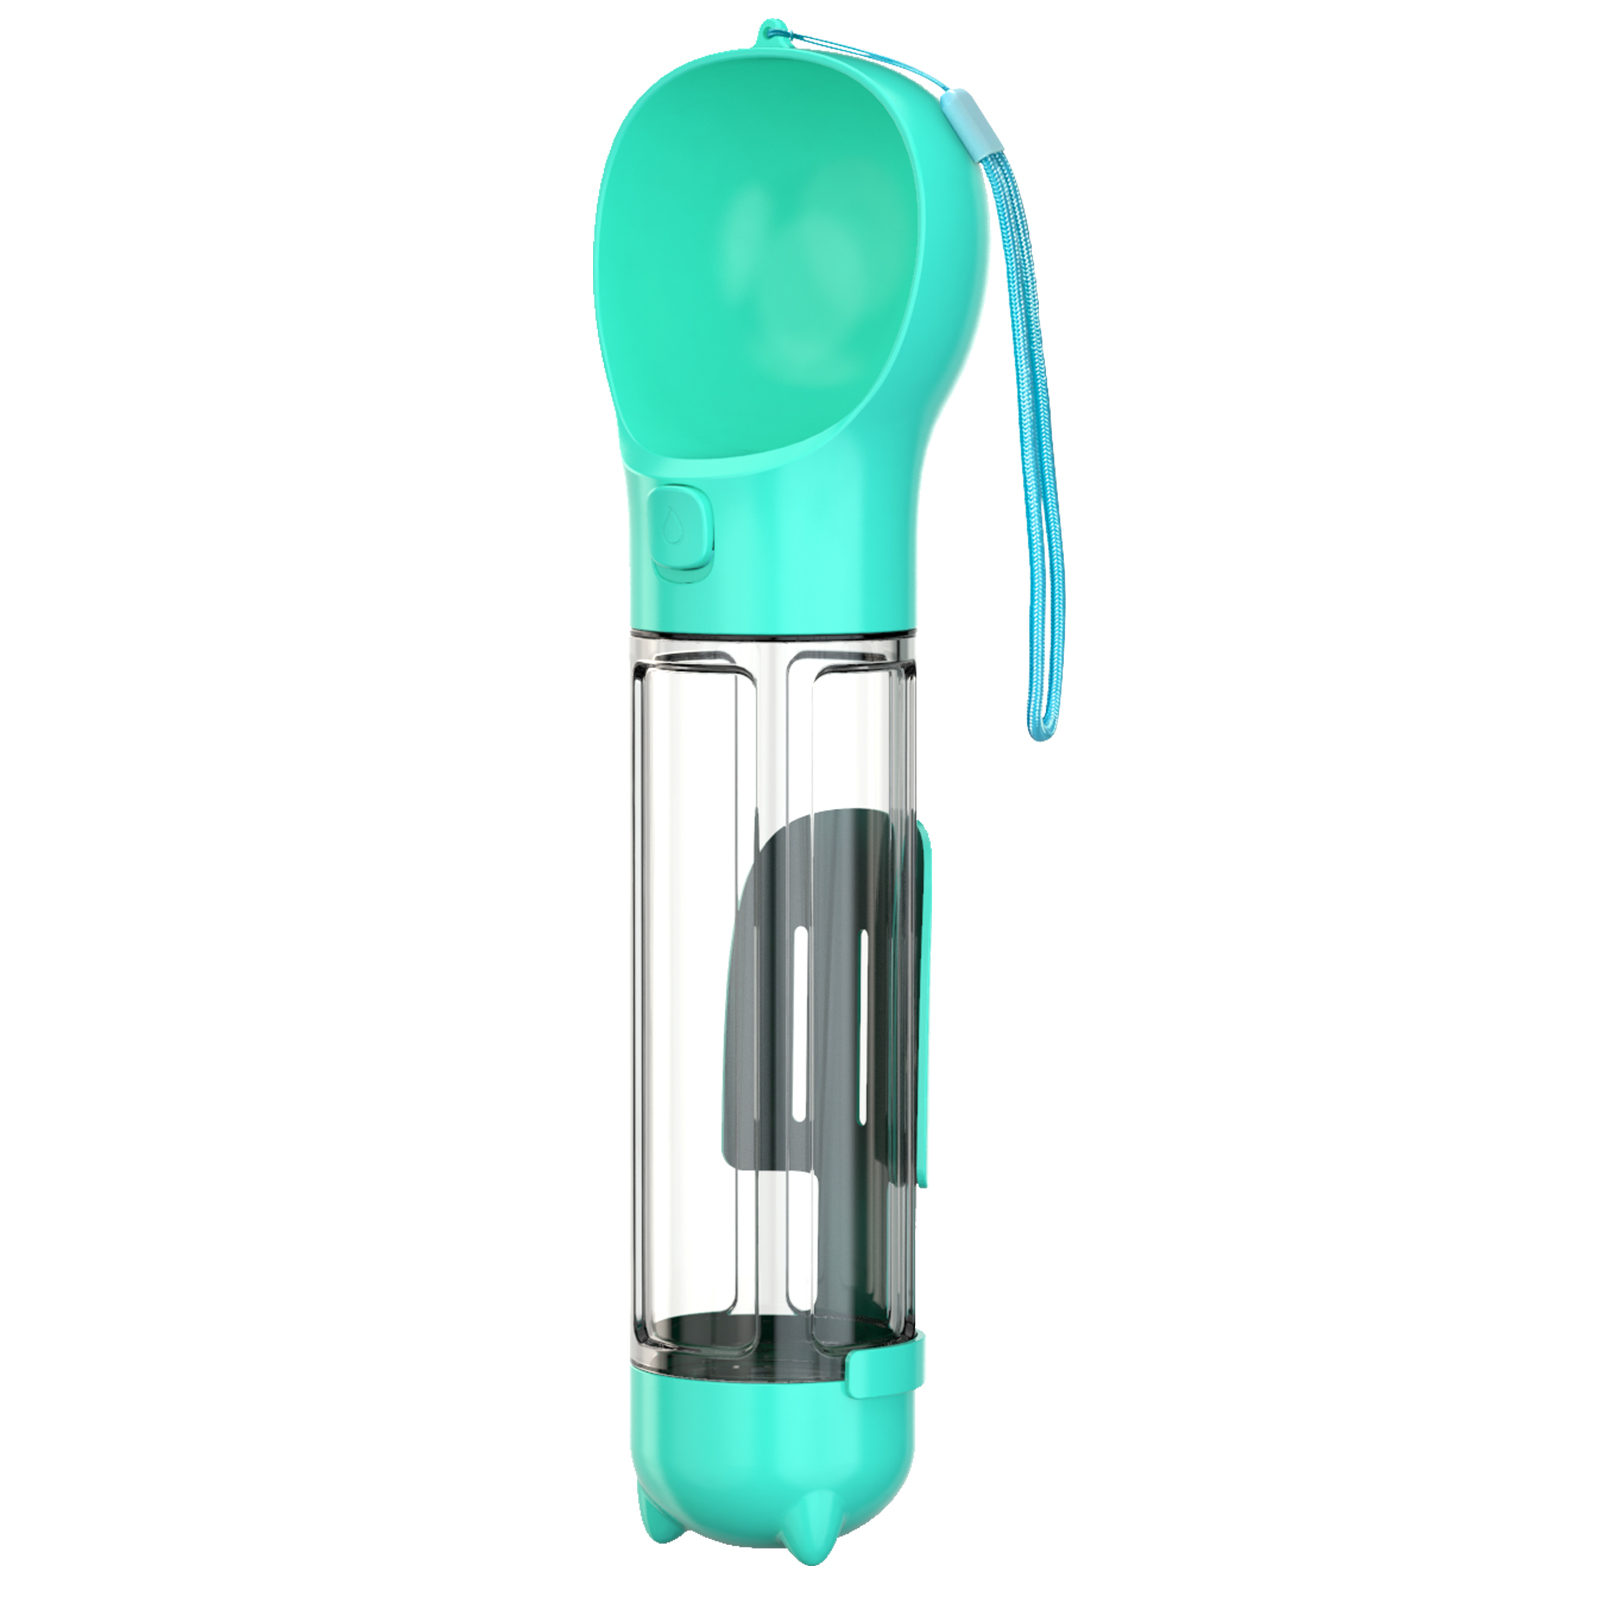 Leak Proof Portable Puppy Water Dispenser with Drinking Feeder for Pets Outdoor Walking